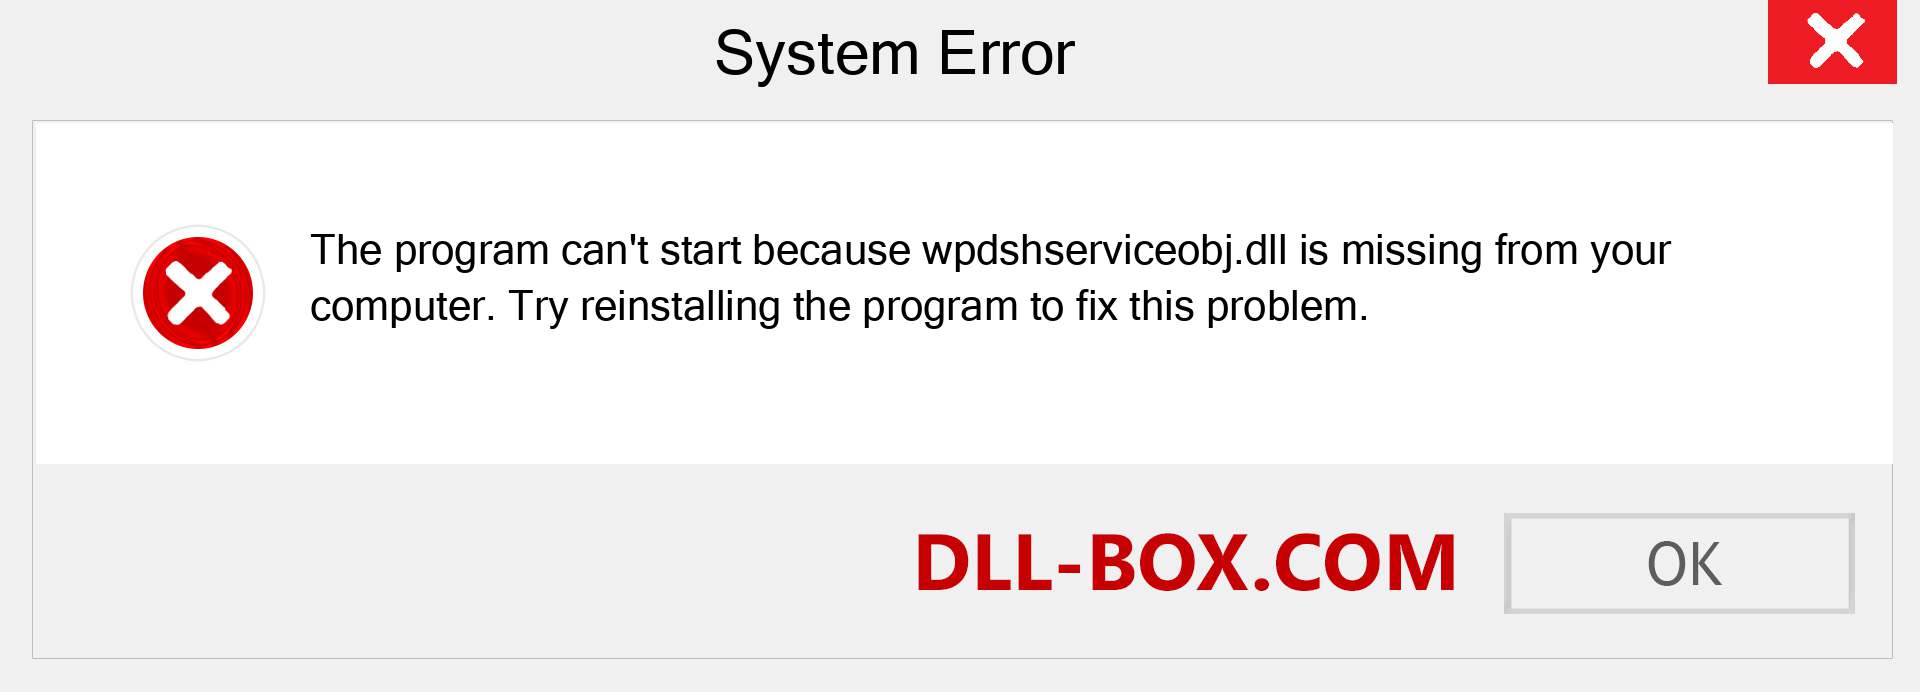  wpdshserviceobj.dll file is missing?. Download for Windows 7, 8, 10 - Fix  wpdshserviceobj dll Missing Error on Windows, photos, images